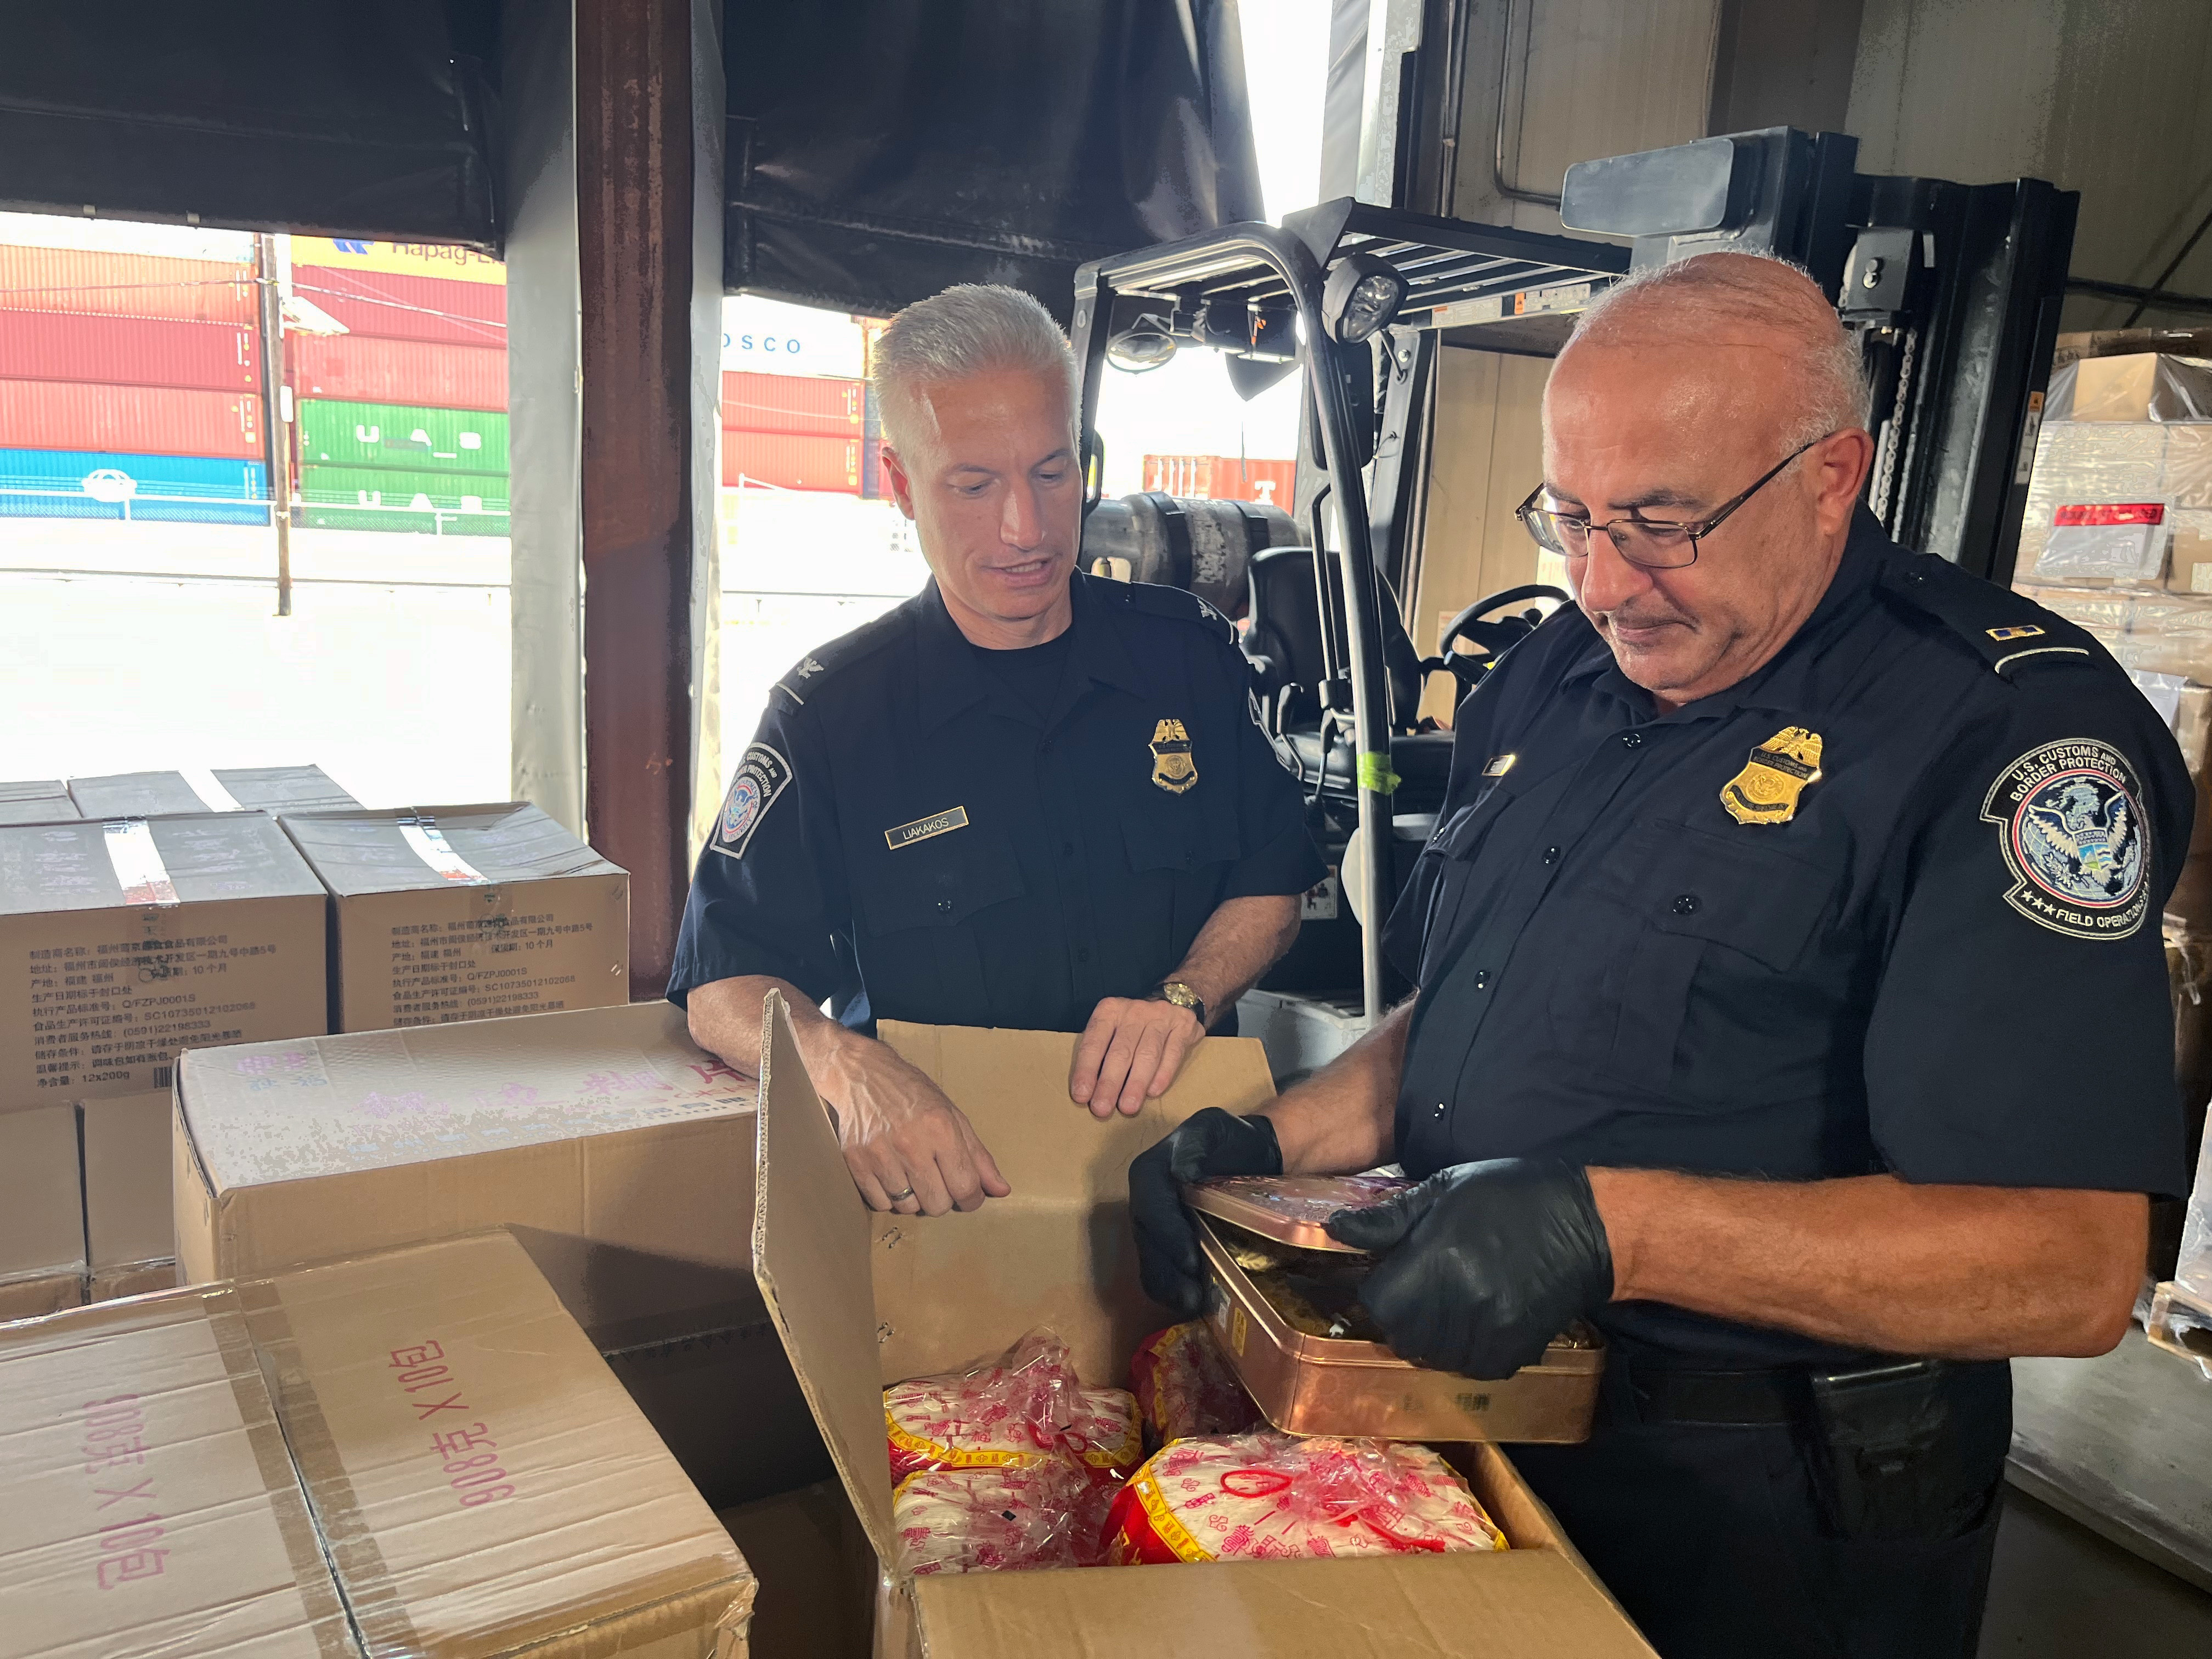 CBP agriculture specialists find smuggled pork moon cakes while conducting an exam at the seaport.